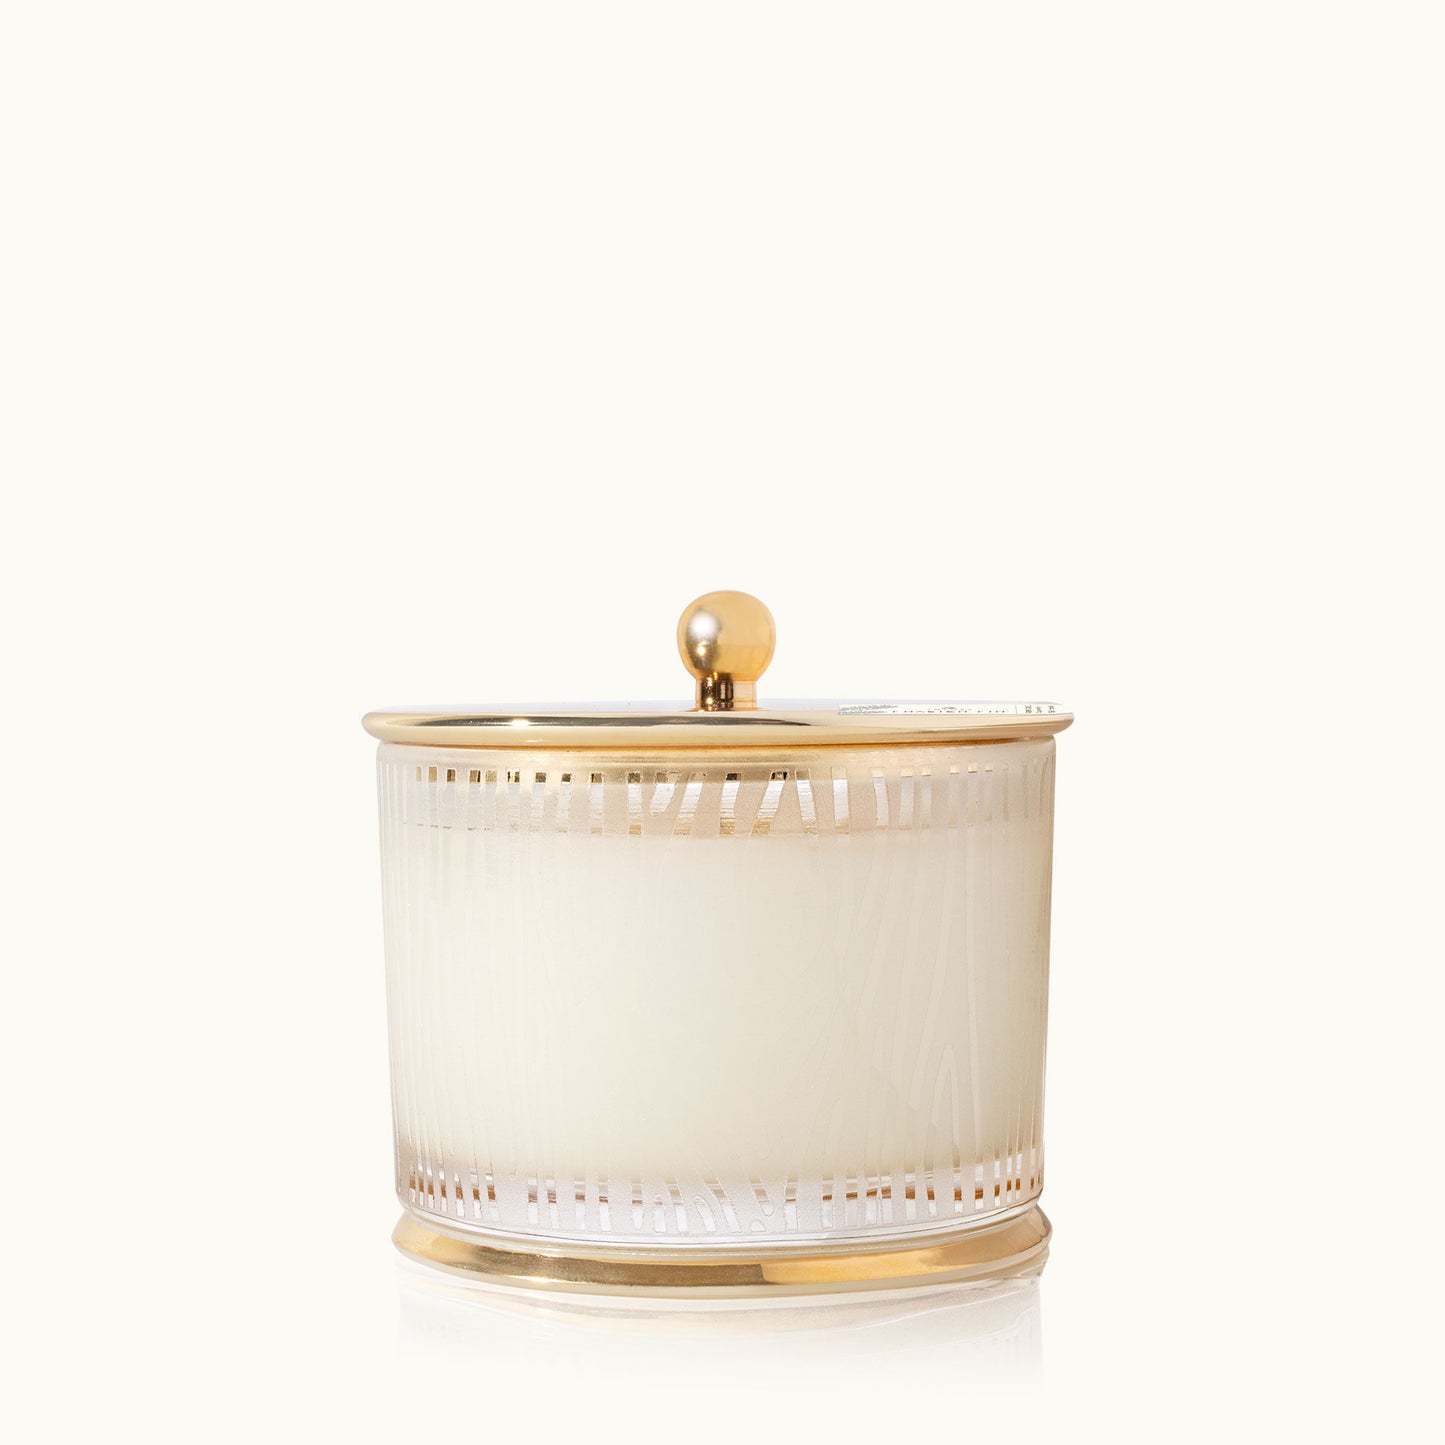 FFr Frosted Wd Grain Candle 9oz